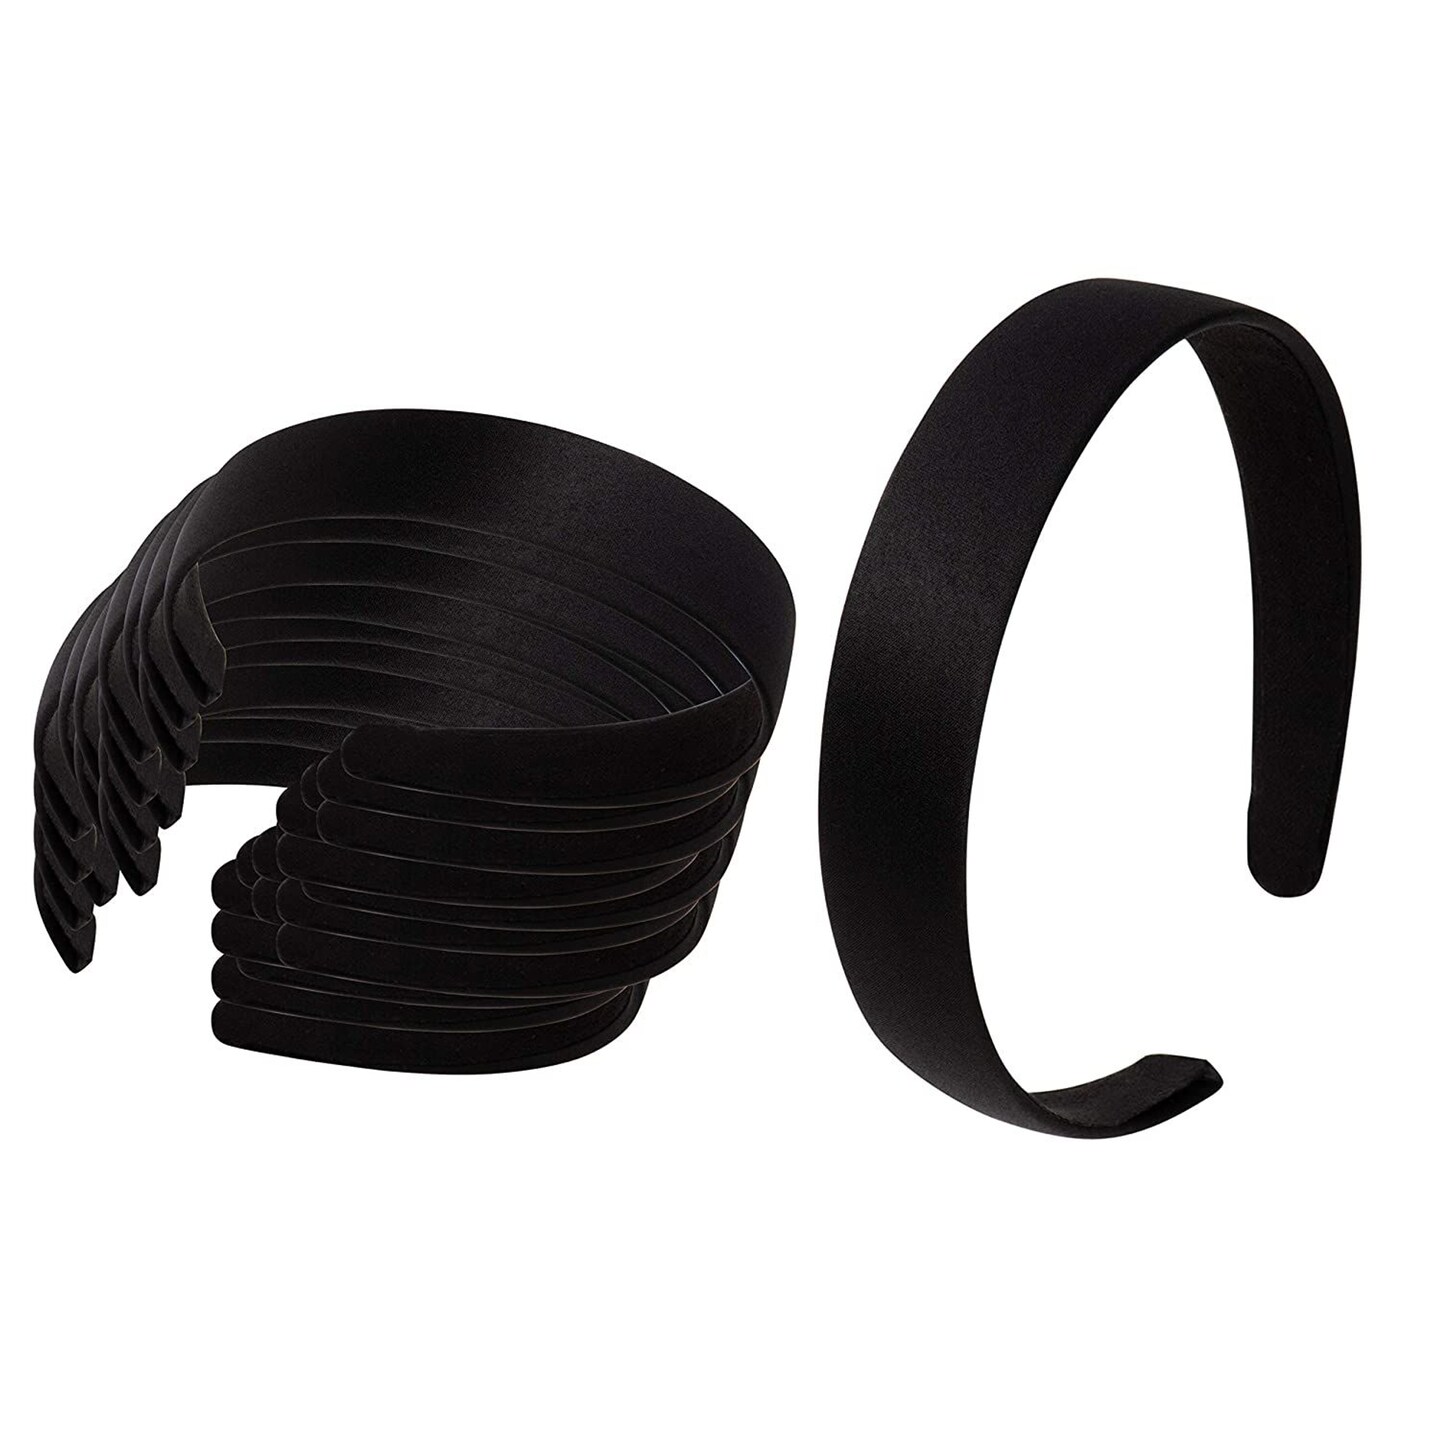 Black Satin Covered Headbands for Women or Teens (4.8 x 5.75 x 1 In, 24 Pack)